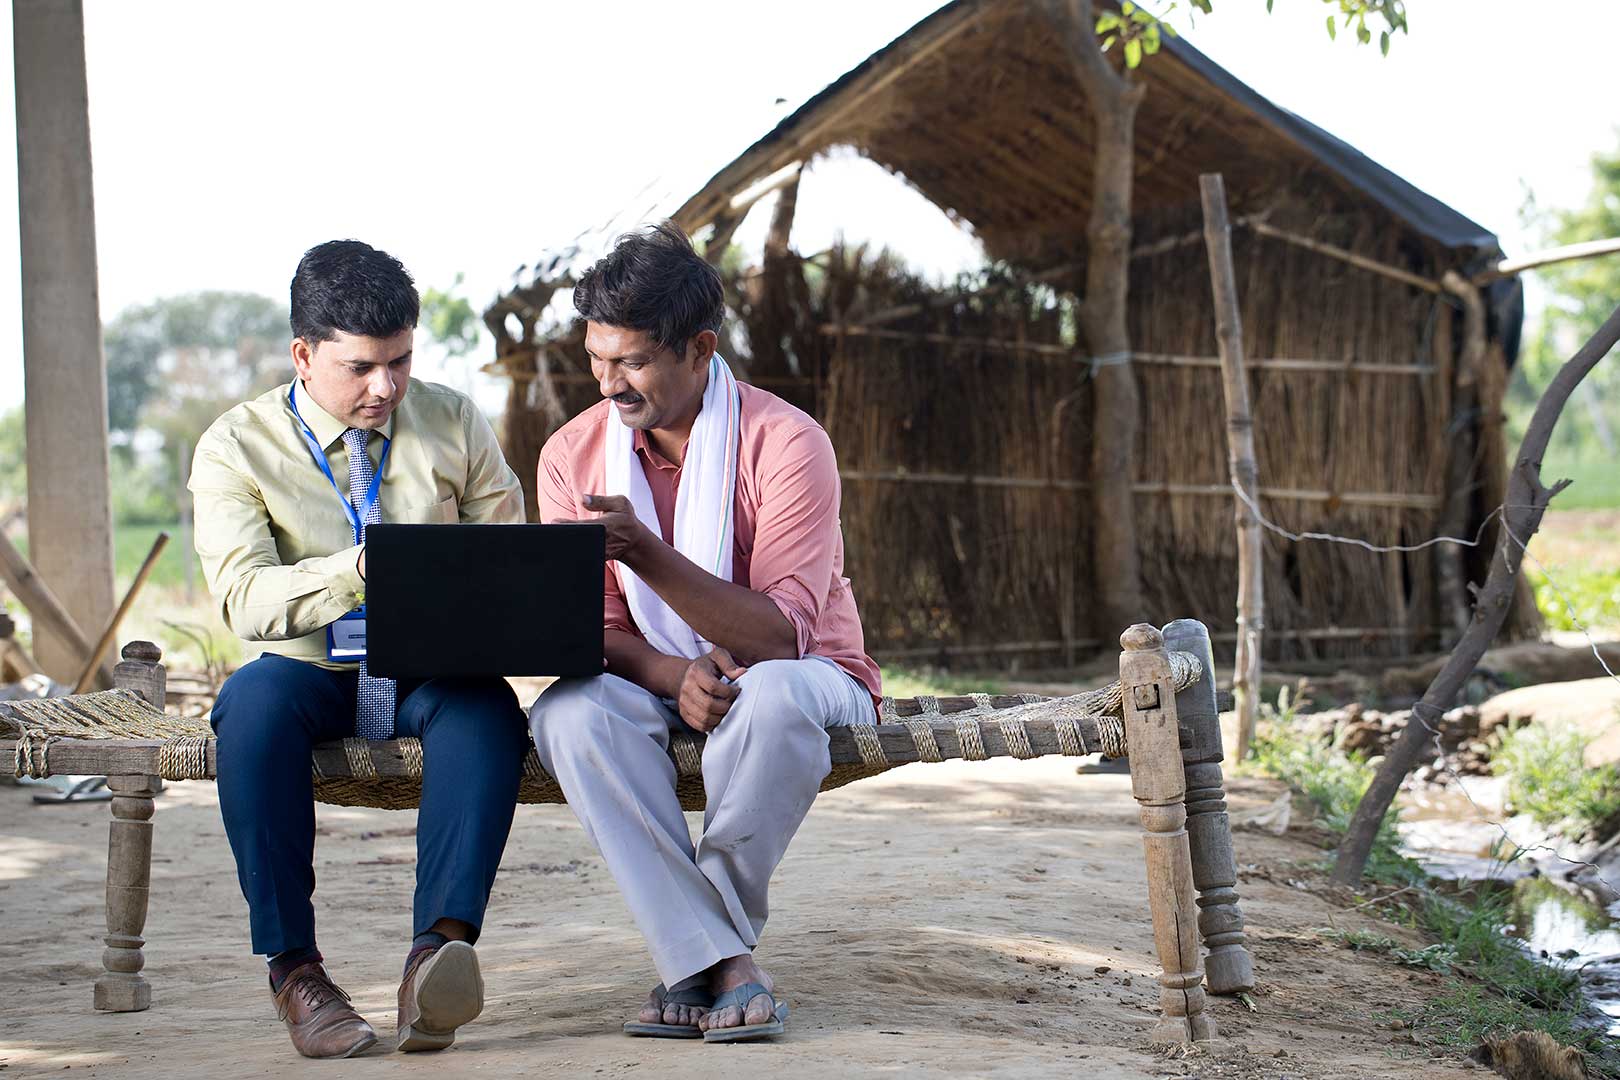 Two people sitting on a bench outdoors looking at a computer